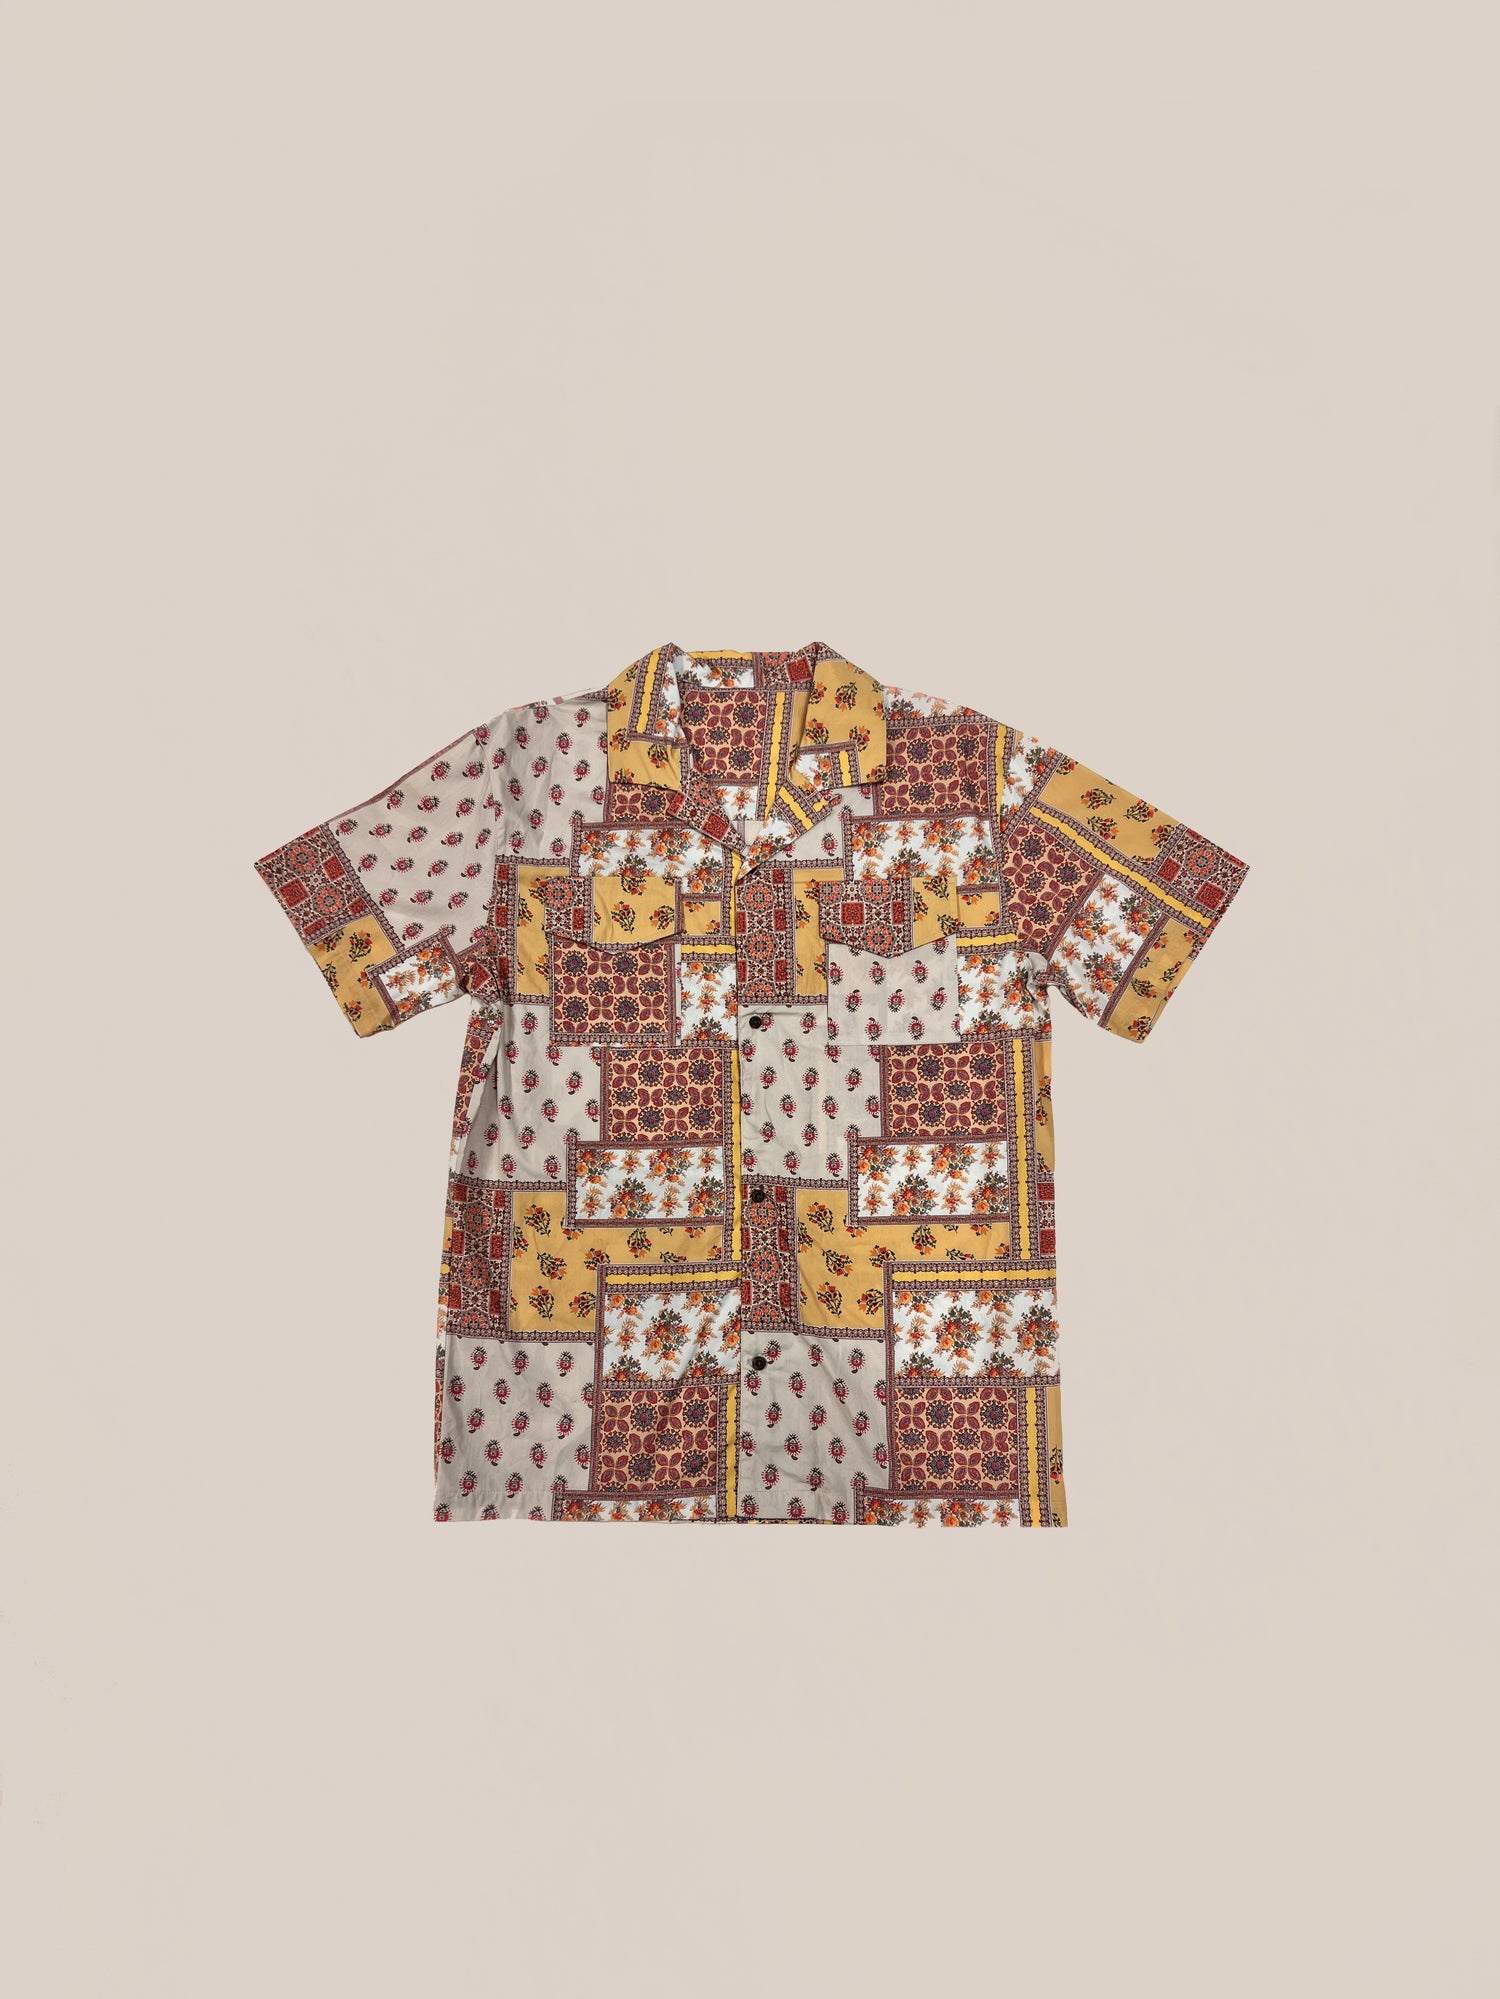 Patchwork camp shirt in 100% cotton, patterned with short sleeves on a beige background by Profound Sample 51 (Multi Patchwork Camp Shirt).